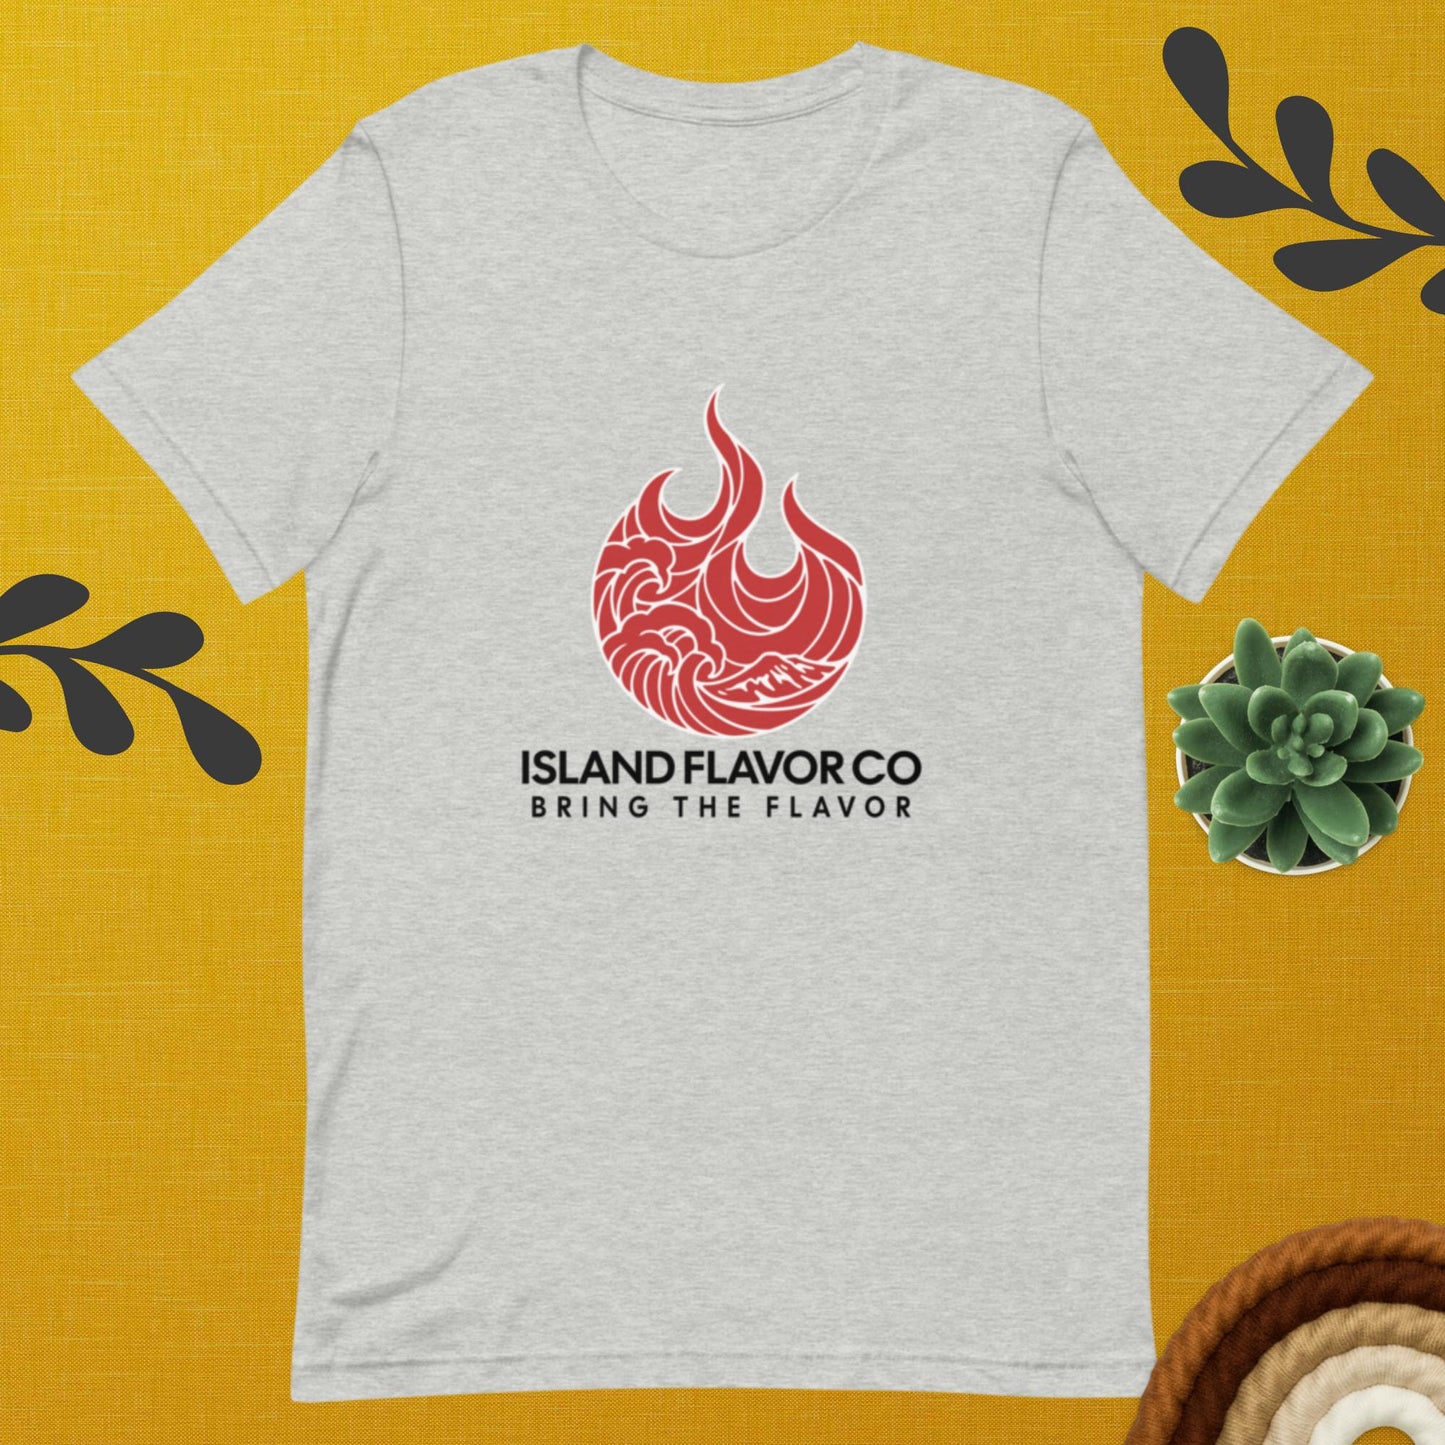 Shop Island Flavor Co. for Strawberry Pig wood chip label T-shirt